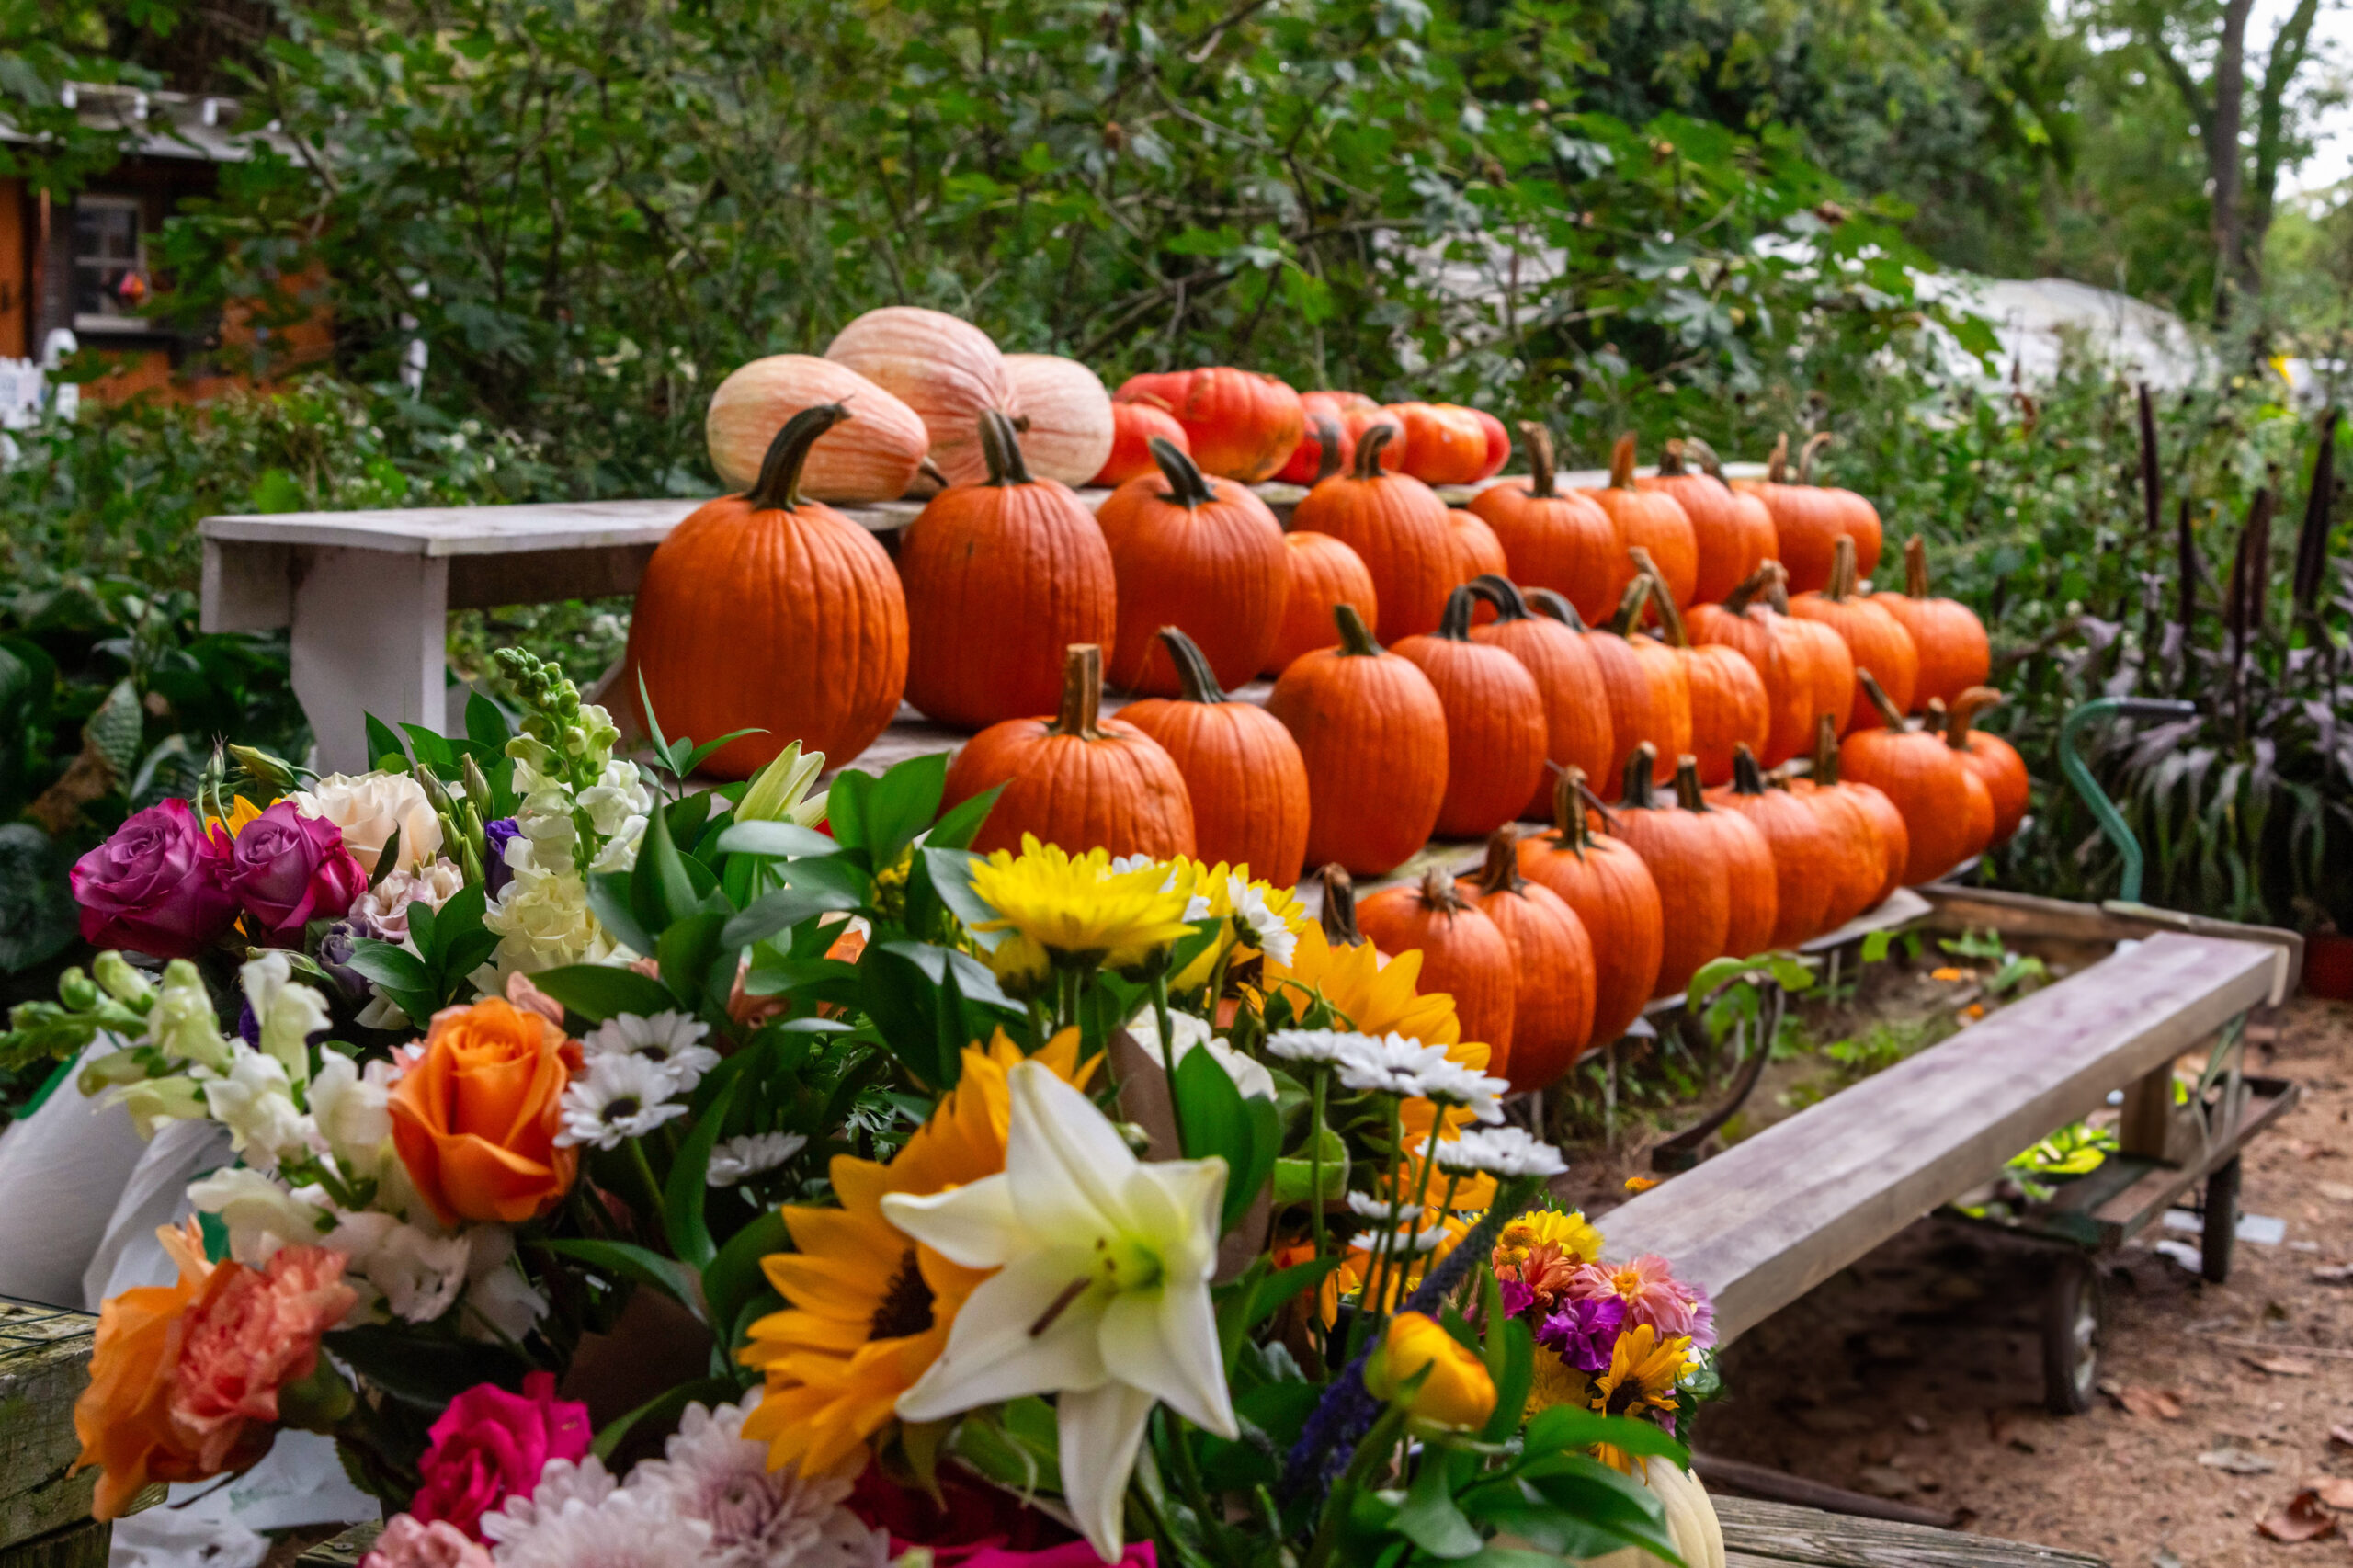 Rows of pumpkins on benches with yellow, orange, purple, and white flowers